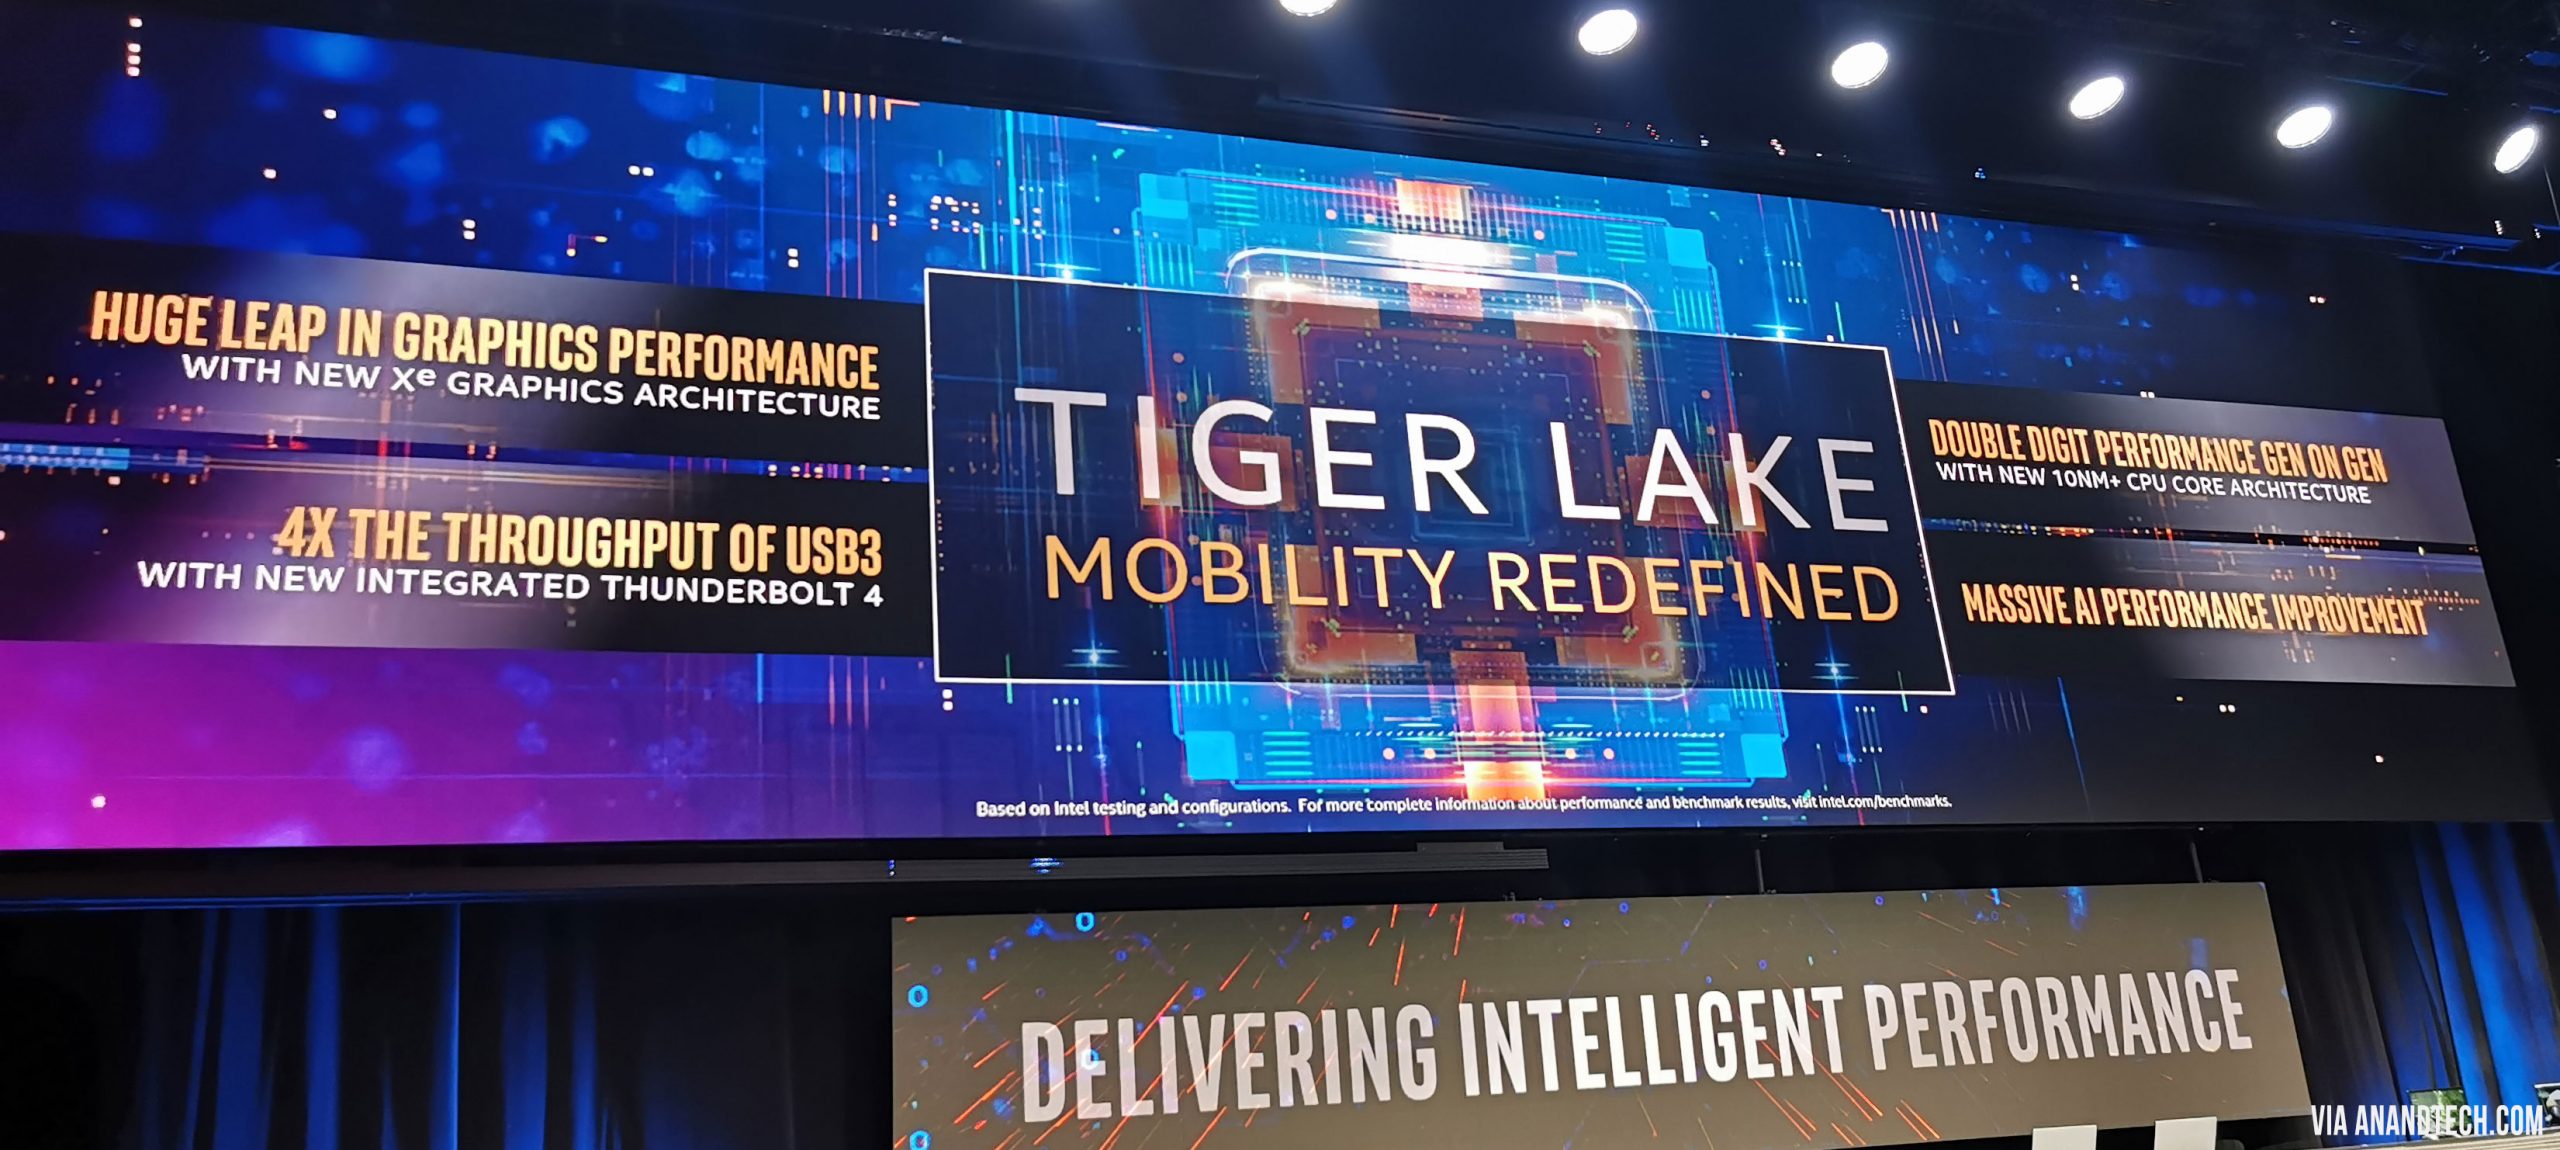 Thunderbolt 4 laptops with Xe dGPU-level graphics teased with Intel Tiger Lake 10+ nm hardware